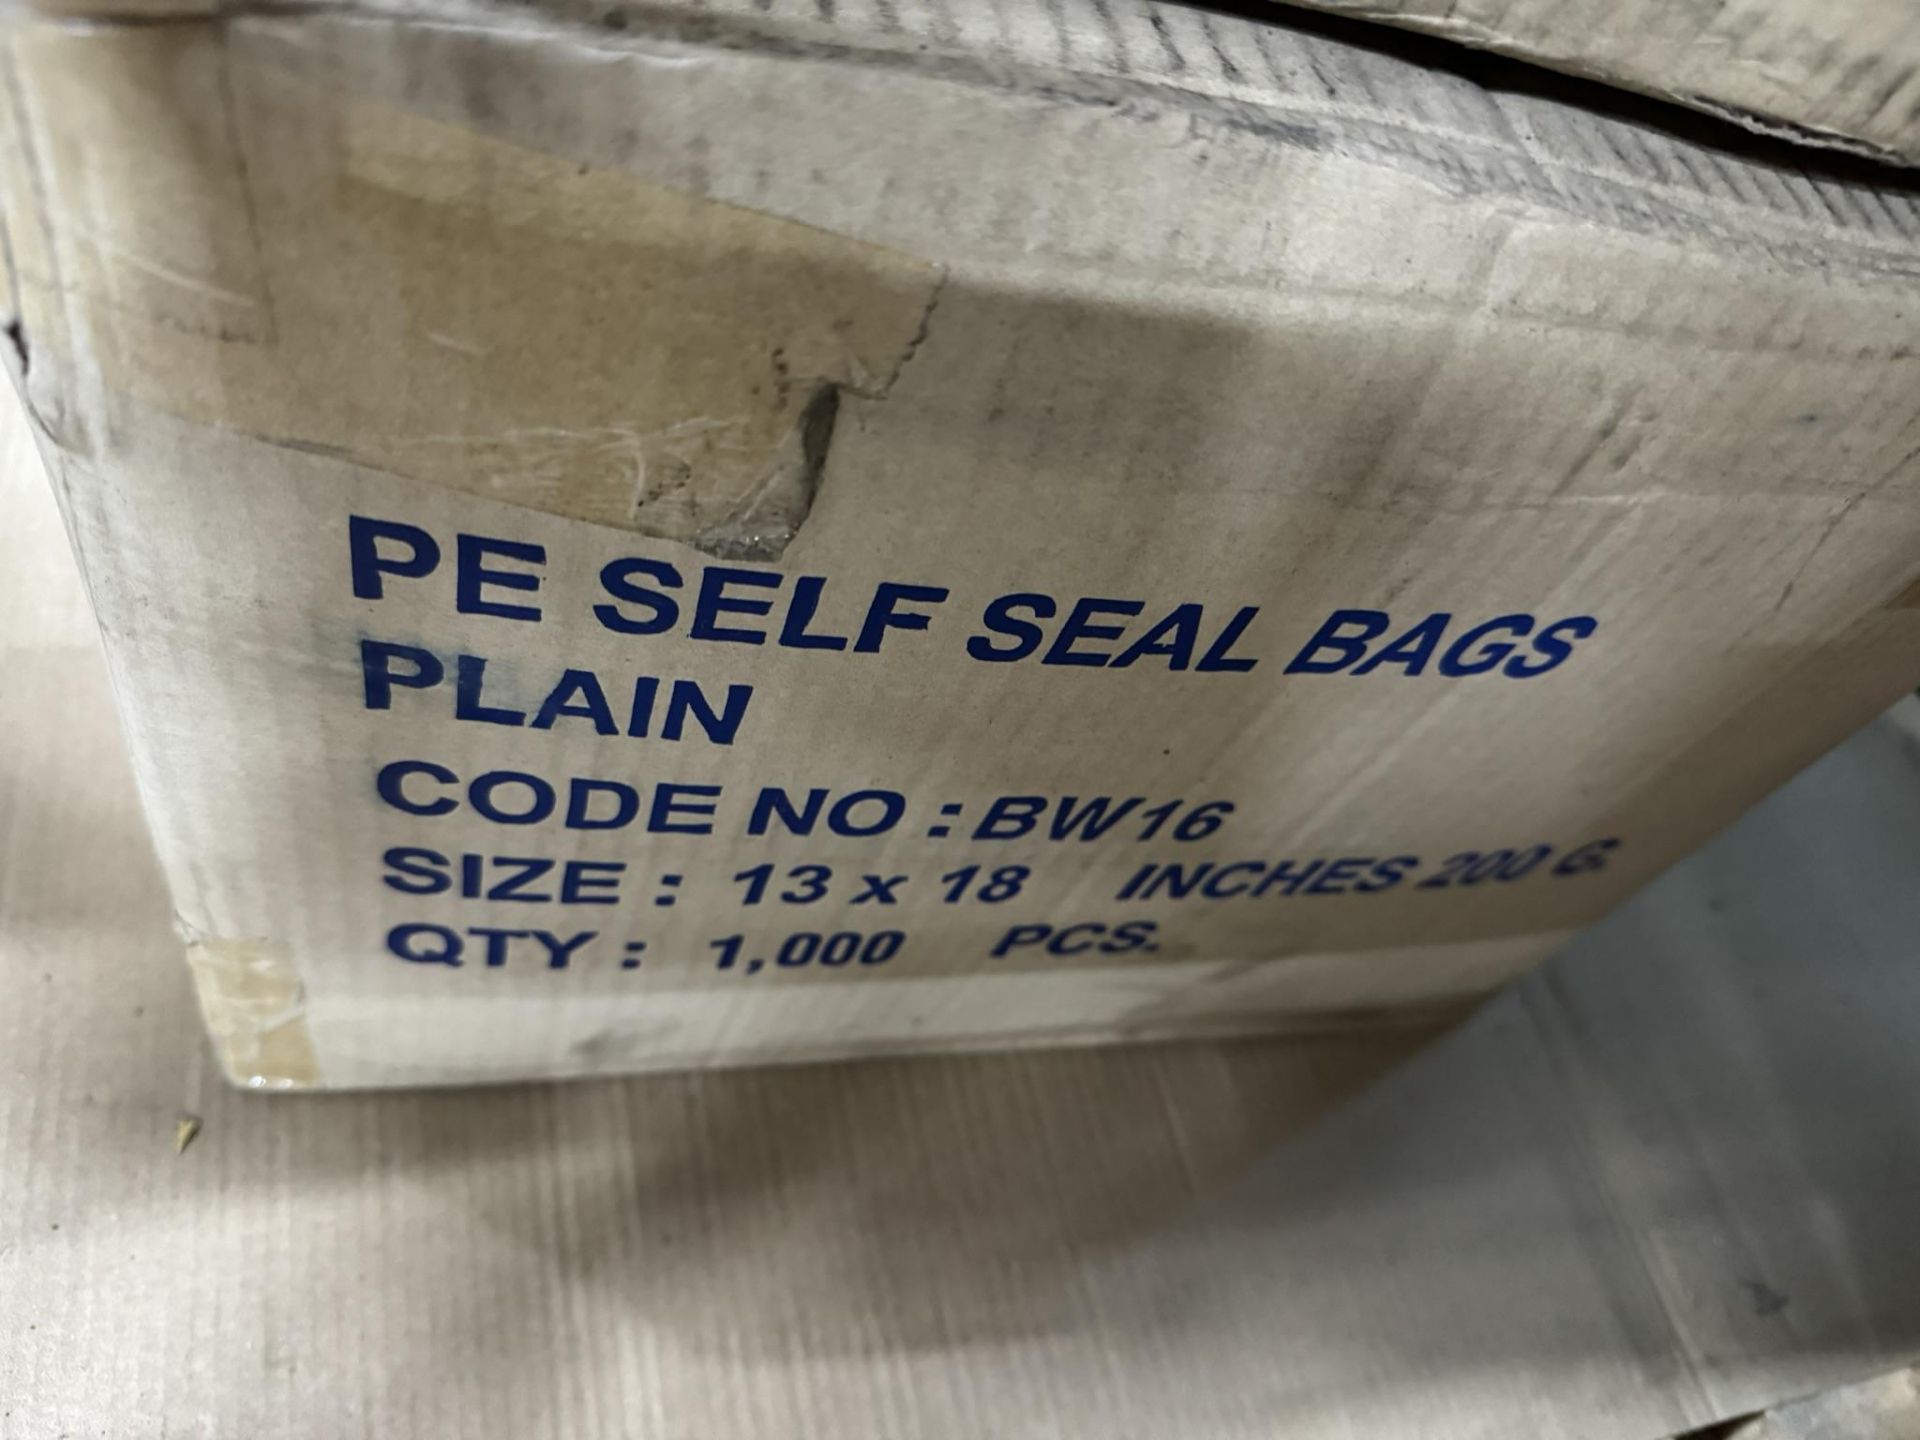 5 x Boxes Of Unbranded Plain Self Seal Bags | 13 x 18 inch - Image 5 of 6